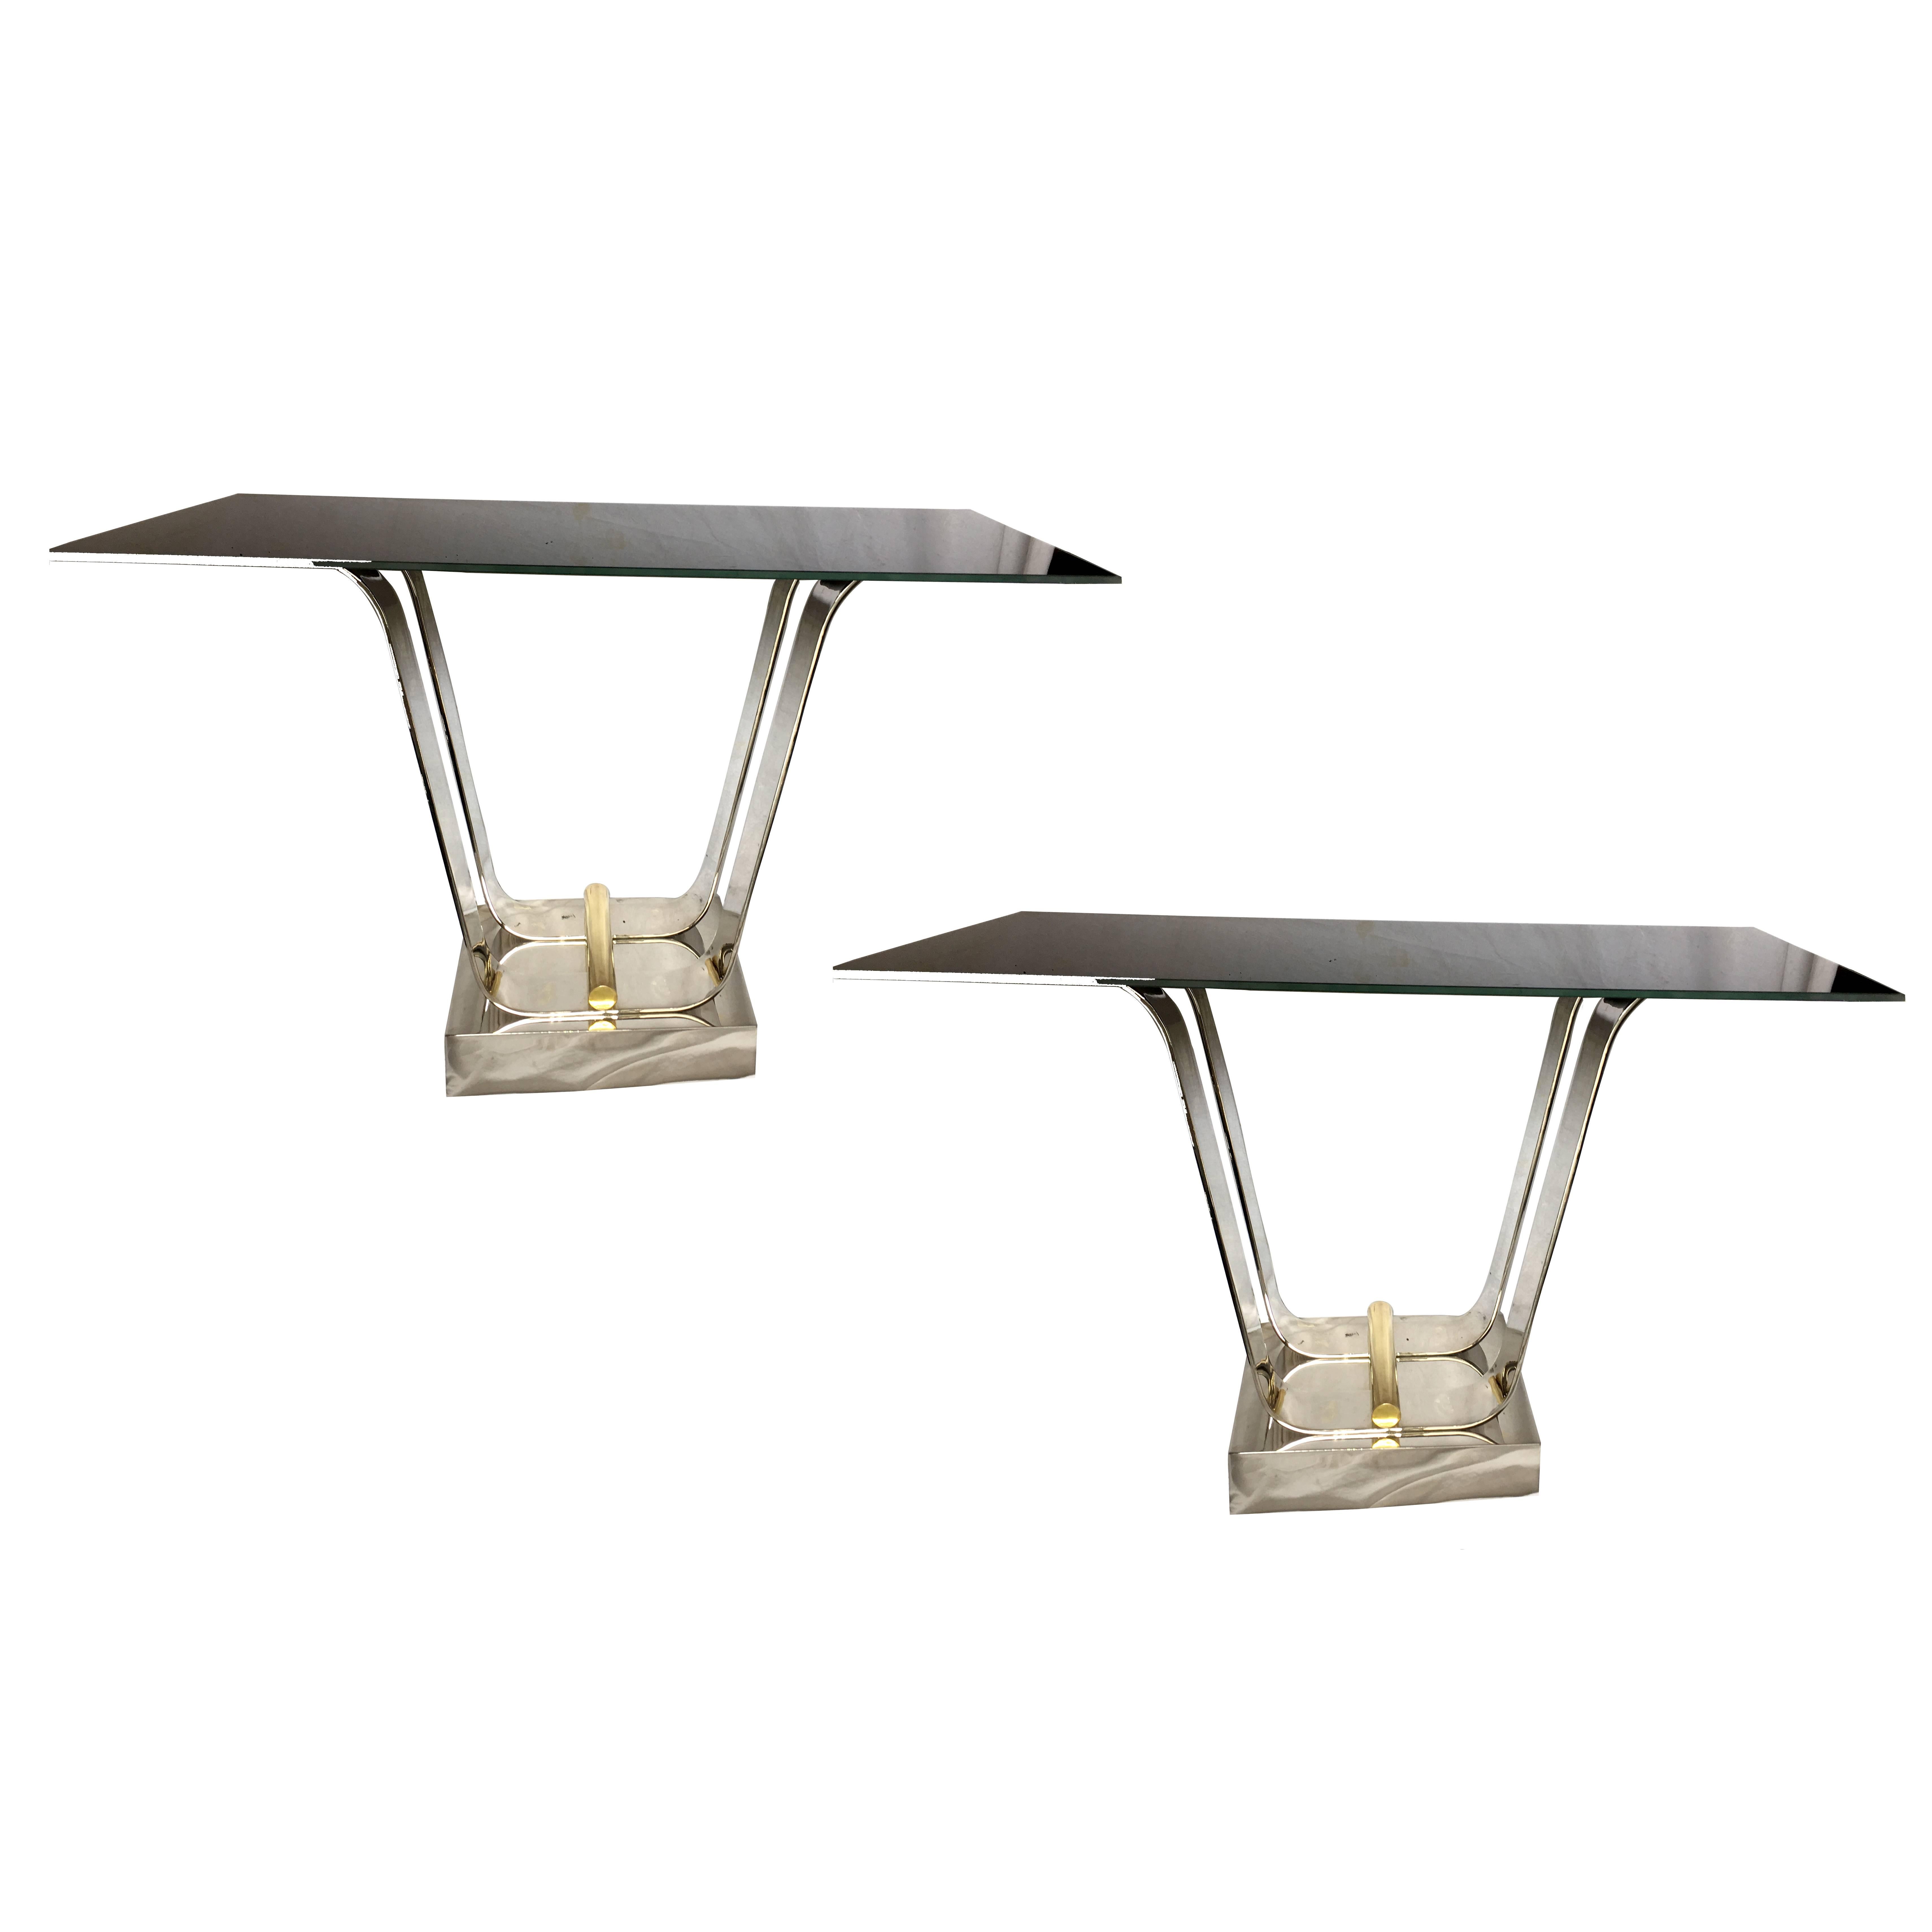 A pair of Italian, circa 1960s nickel-plated and bronze console tables, with black glass tops.
Sold as pair.

Measurements:
Height 32